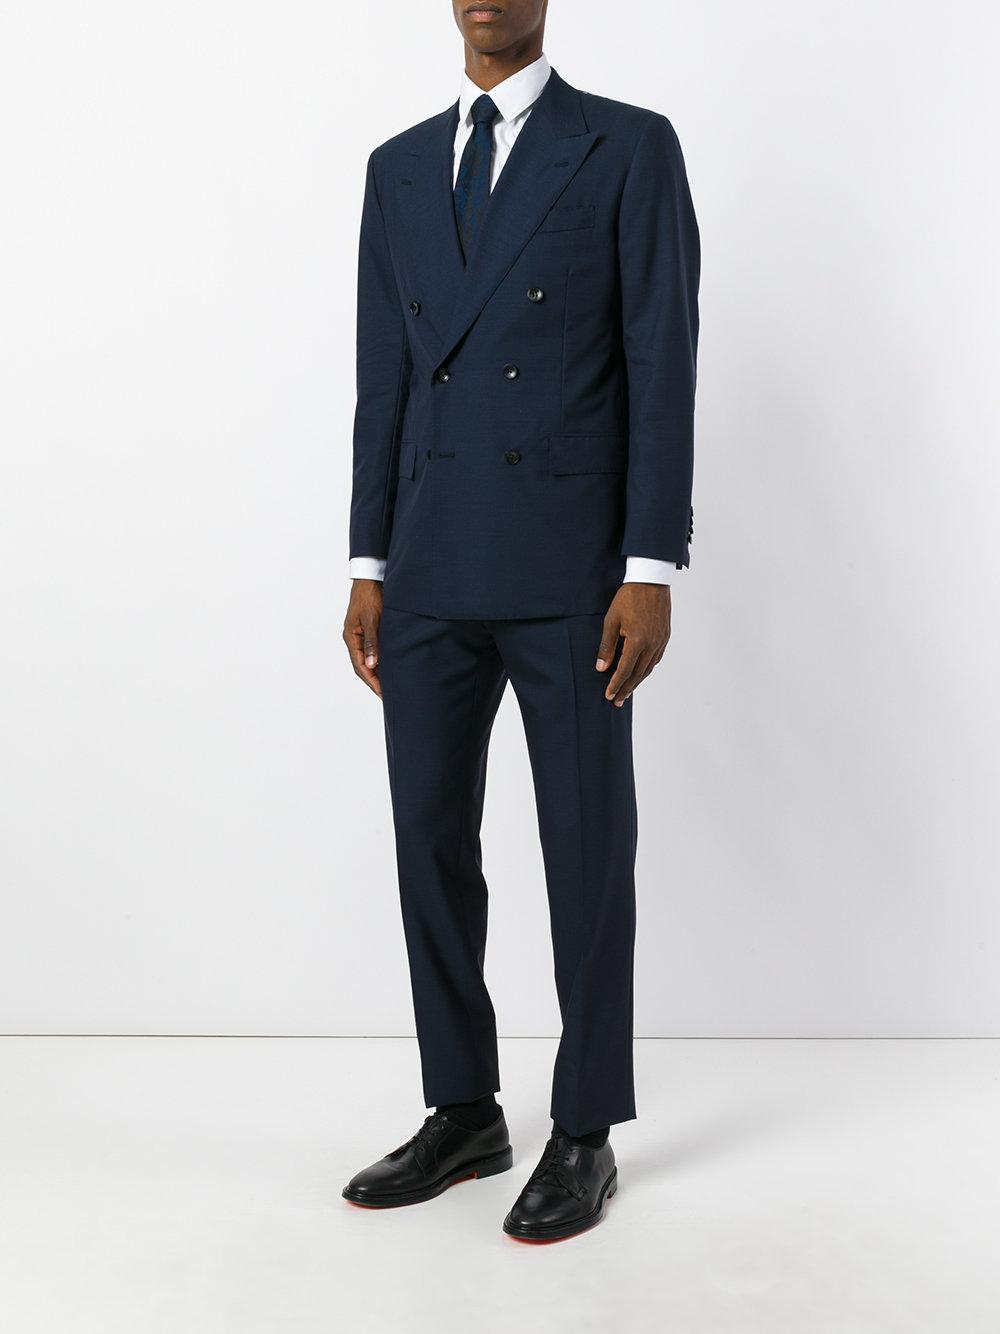 Lyst - Kiton Double-breasted Two-piece Suit in Blue for Men